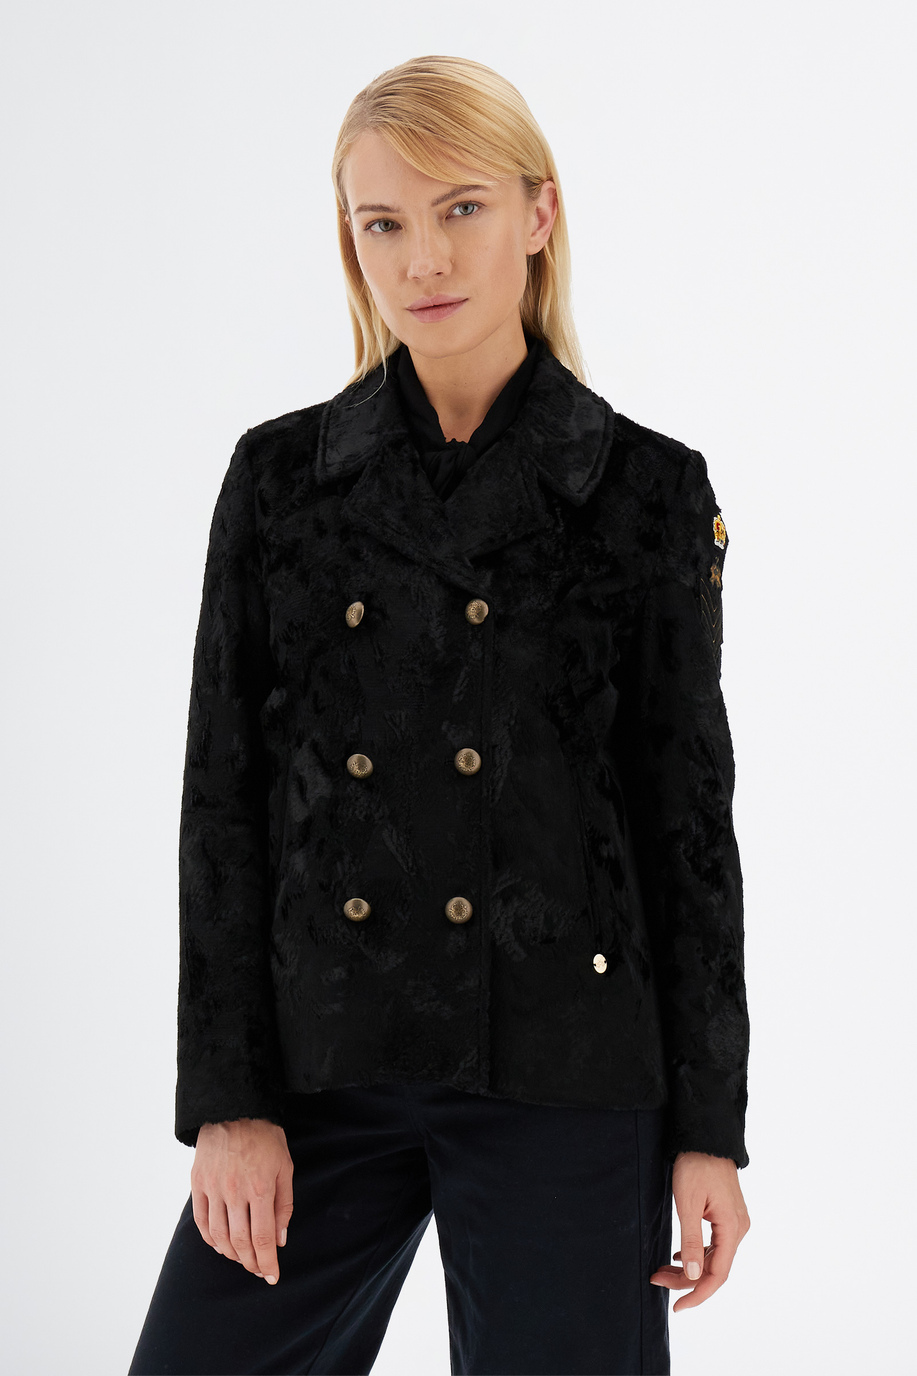 Women’s Long Sleeve England Jacket with Fur - Outerwear | La Martina - Official Online Shop